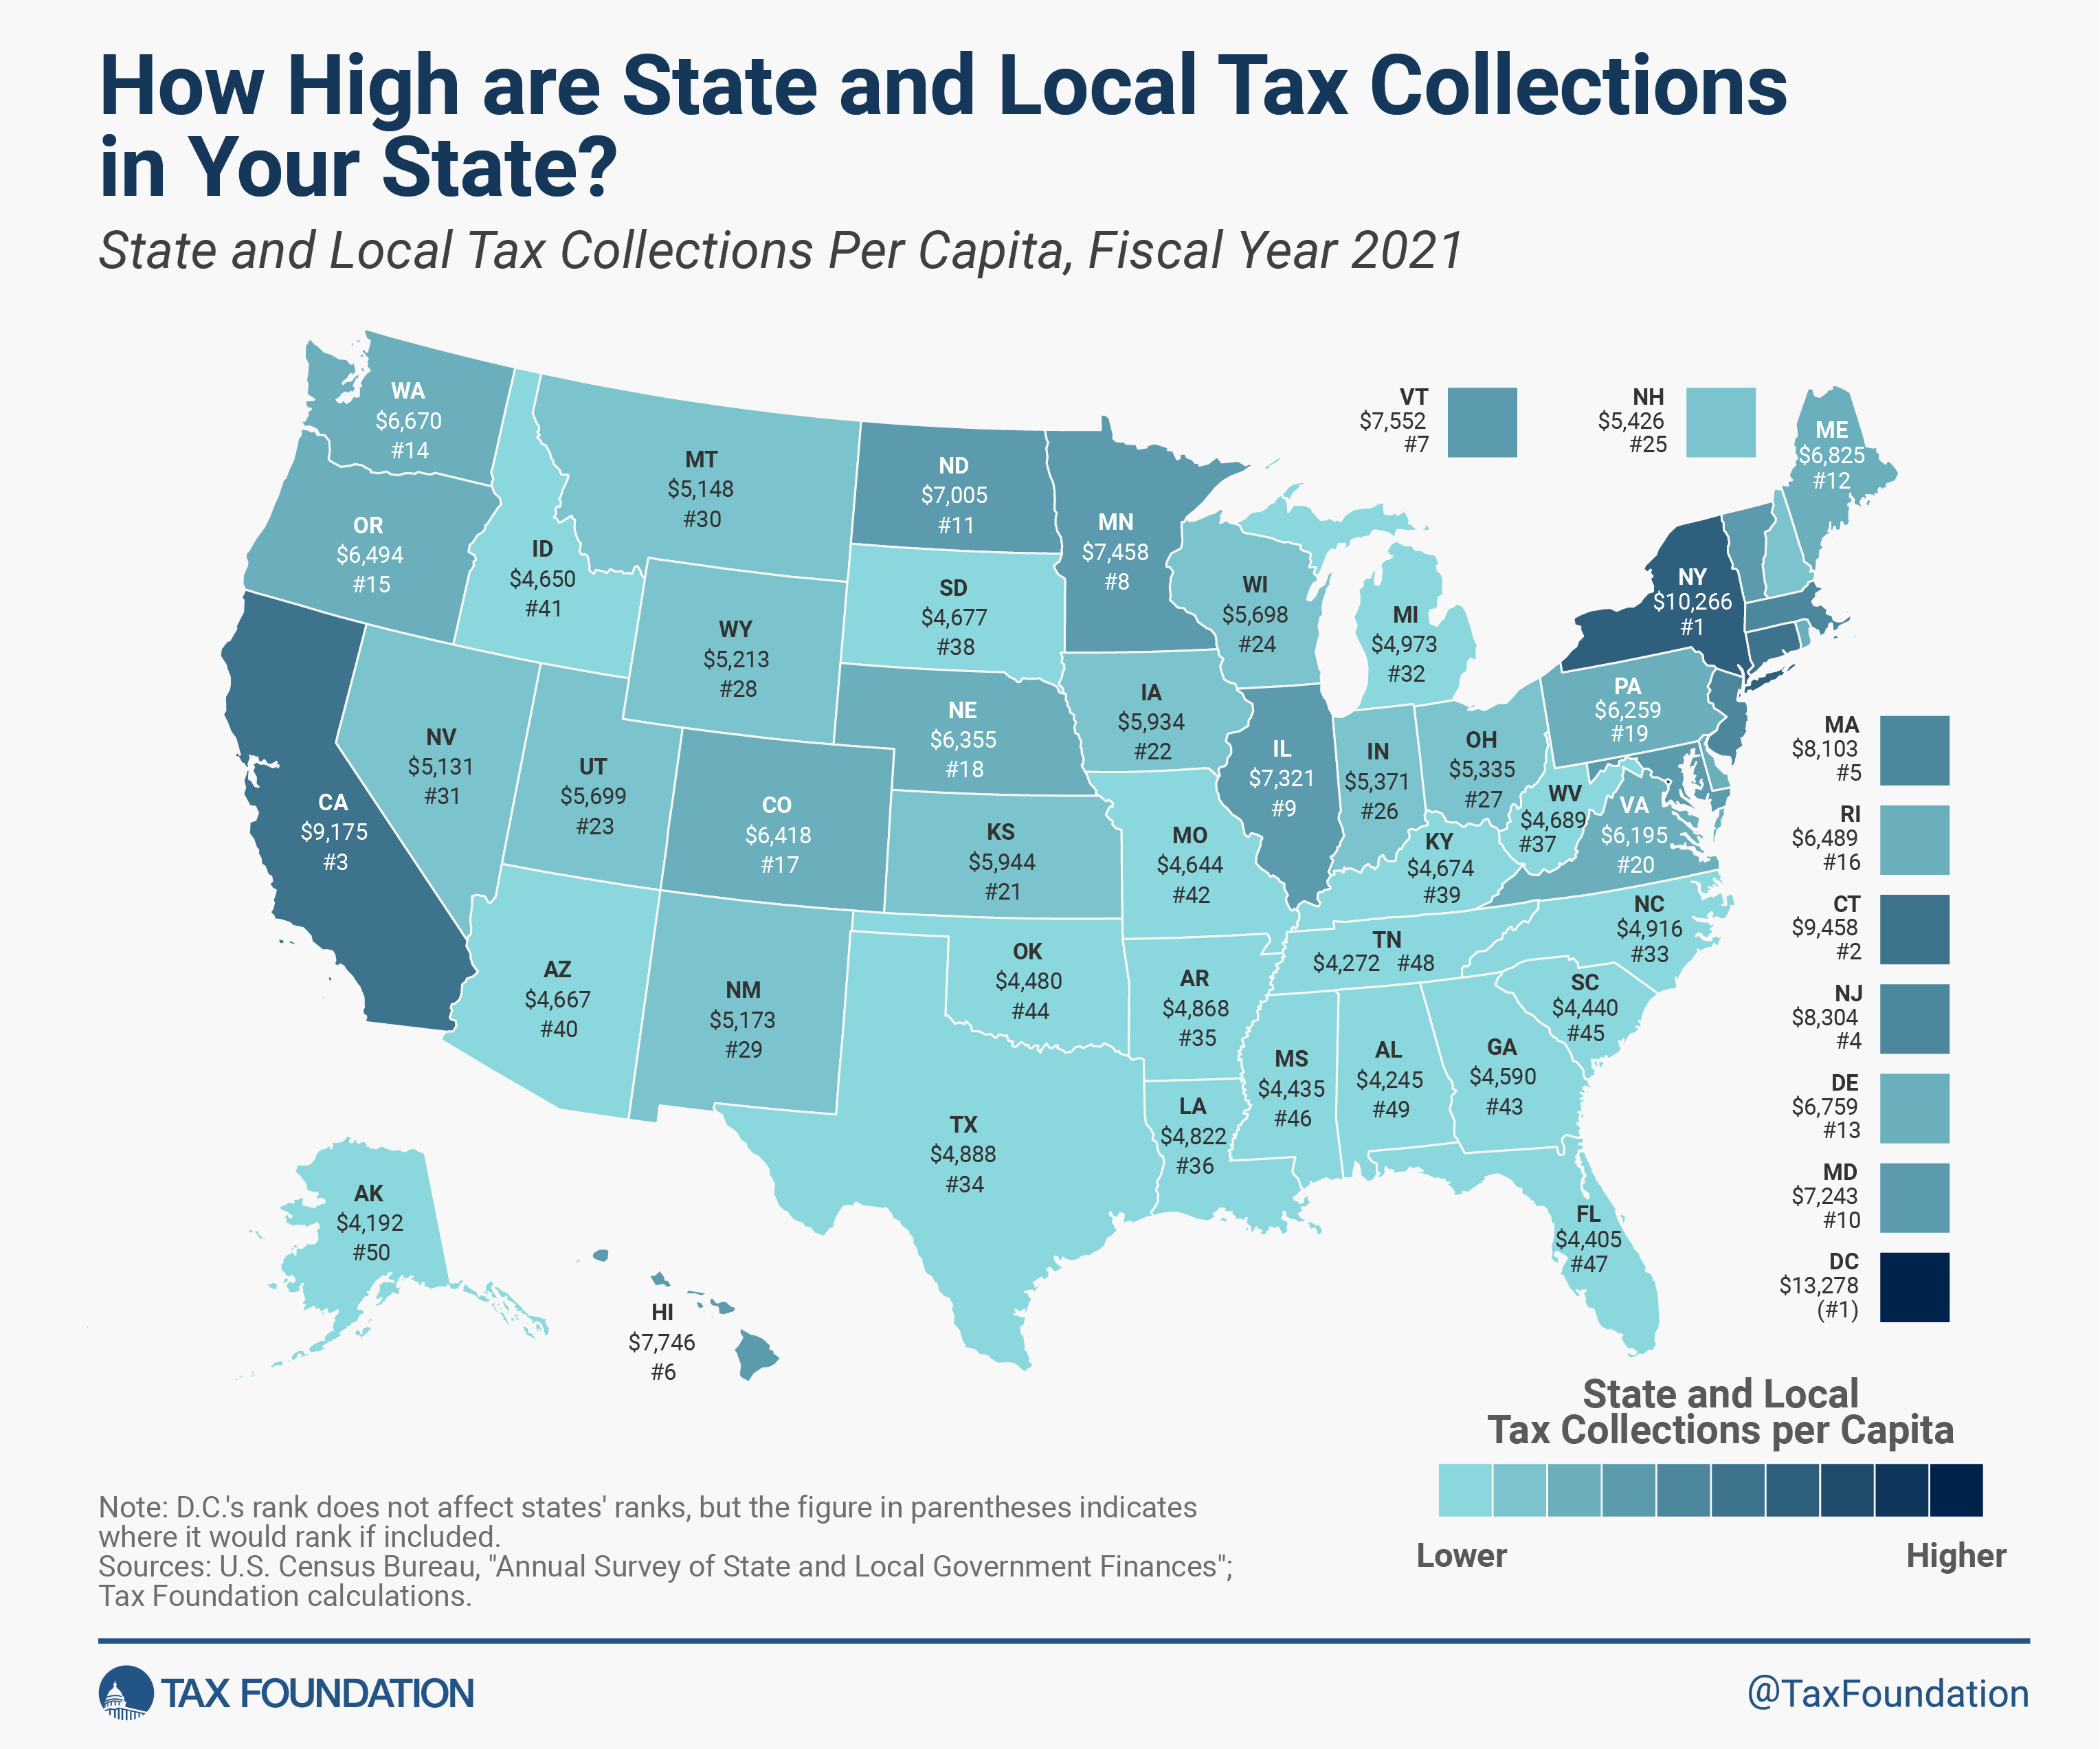 State and local tax collections per capita by state FY 2021